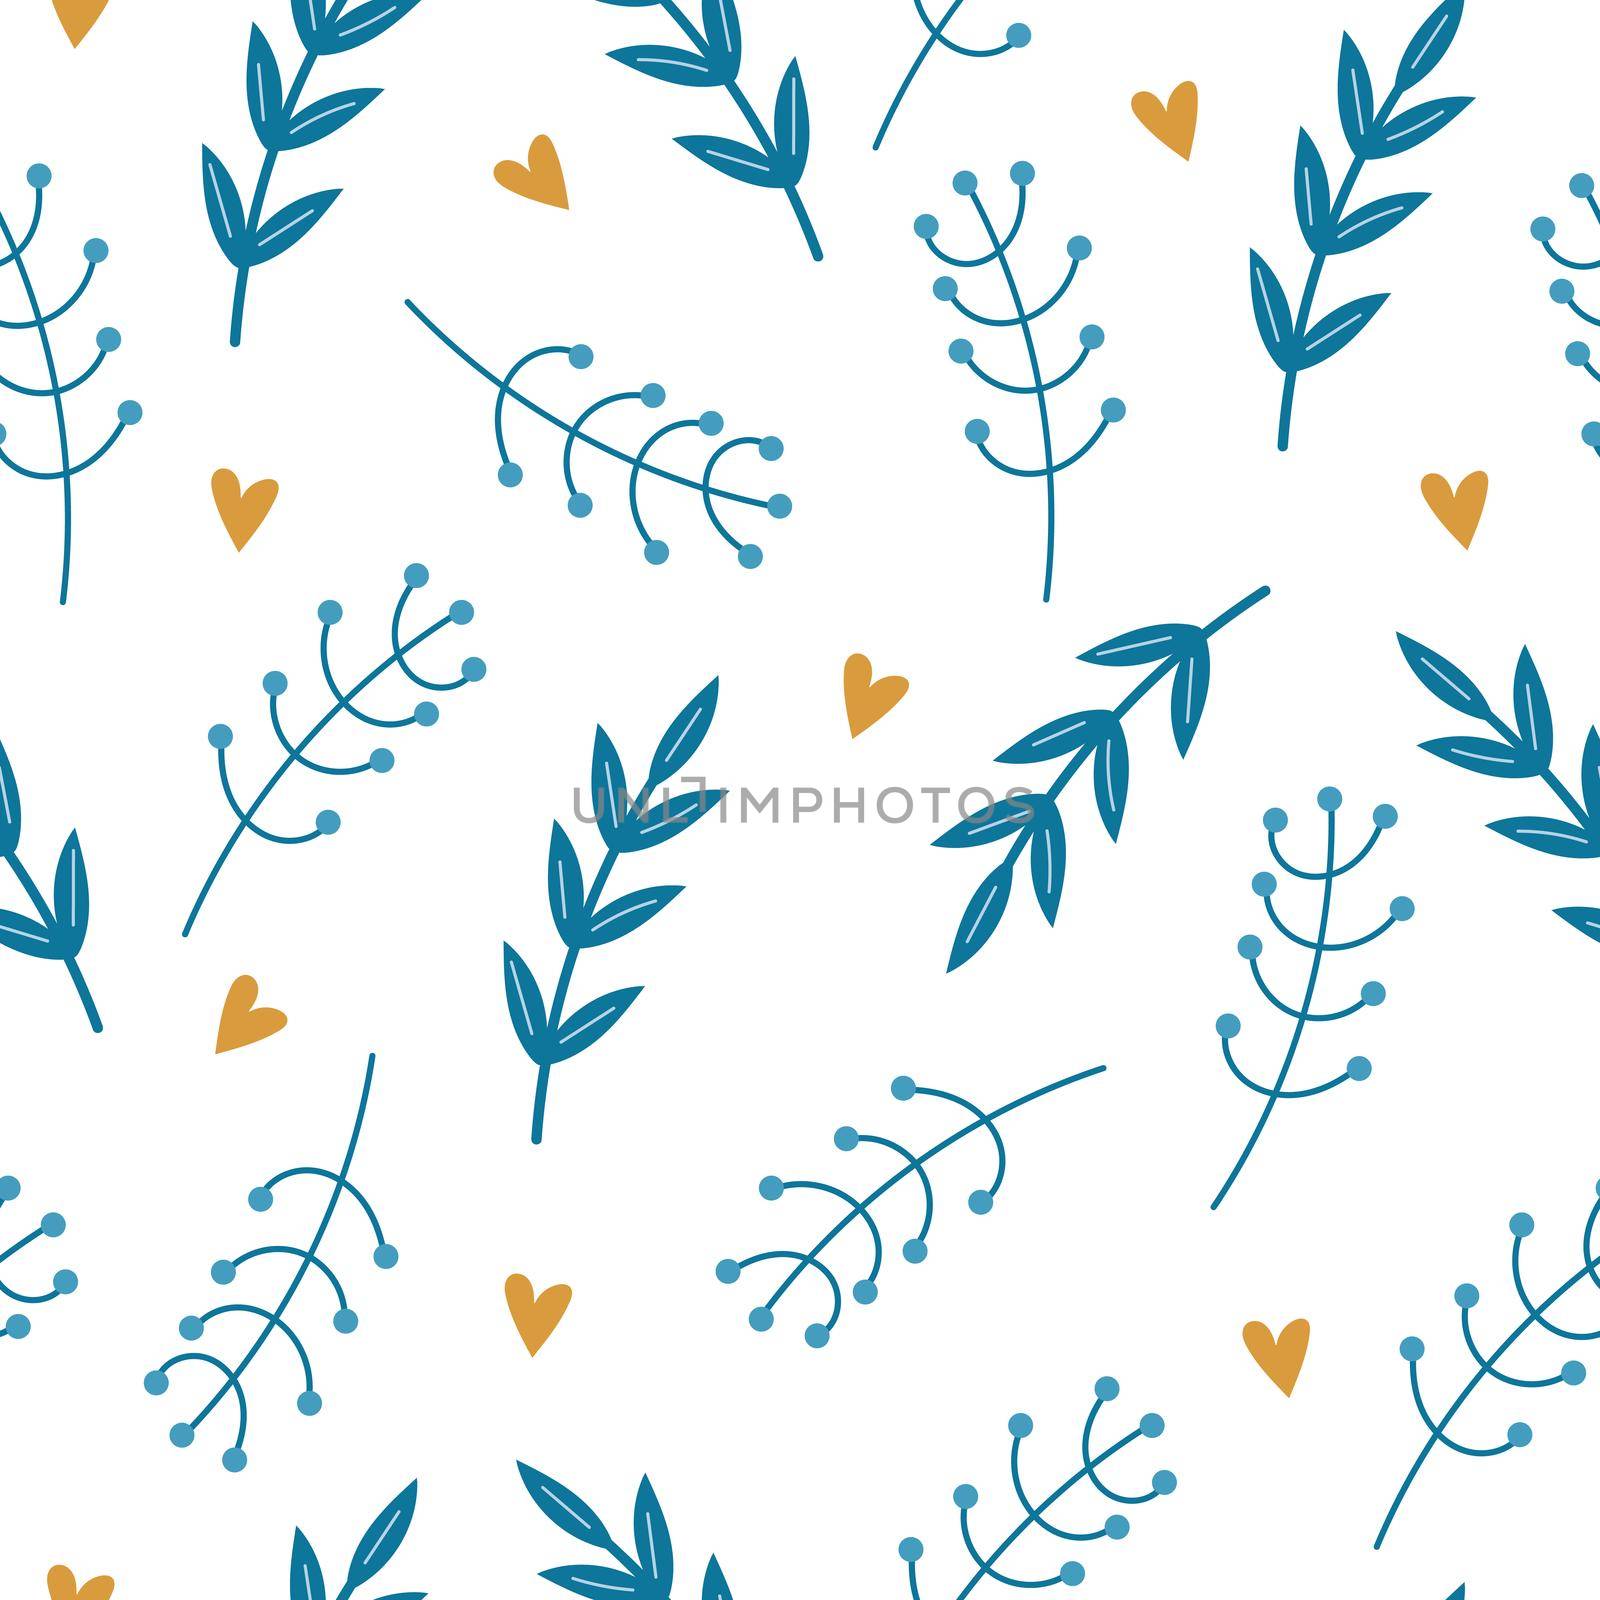 Hand drawn blue small twigs, abstract leaves and hearts - Repeating Pattern by natali_brill